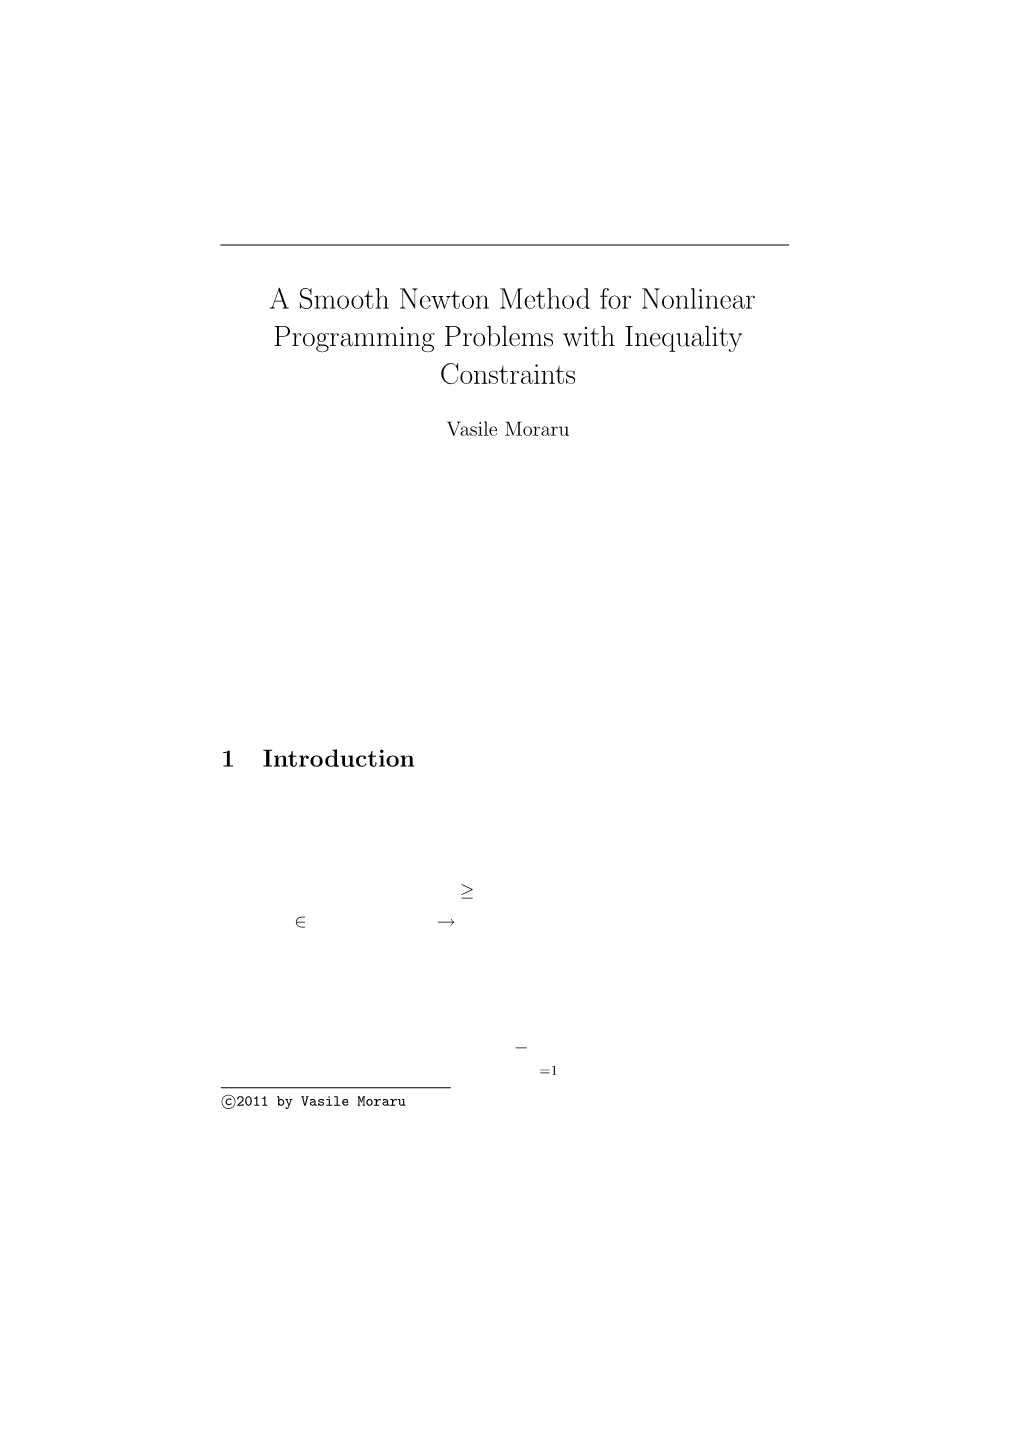 A Smooth Newton Method for Nonlinear Programming Problems with Inequality Constraints